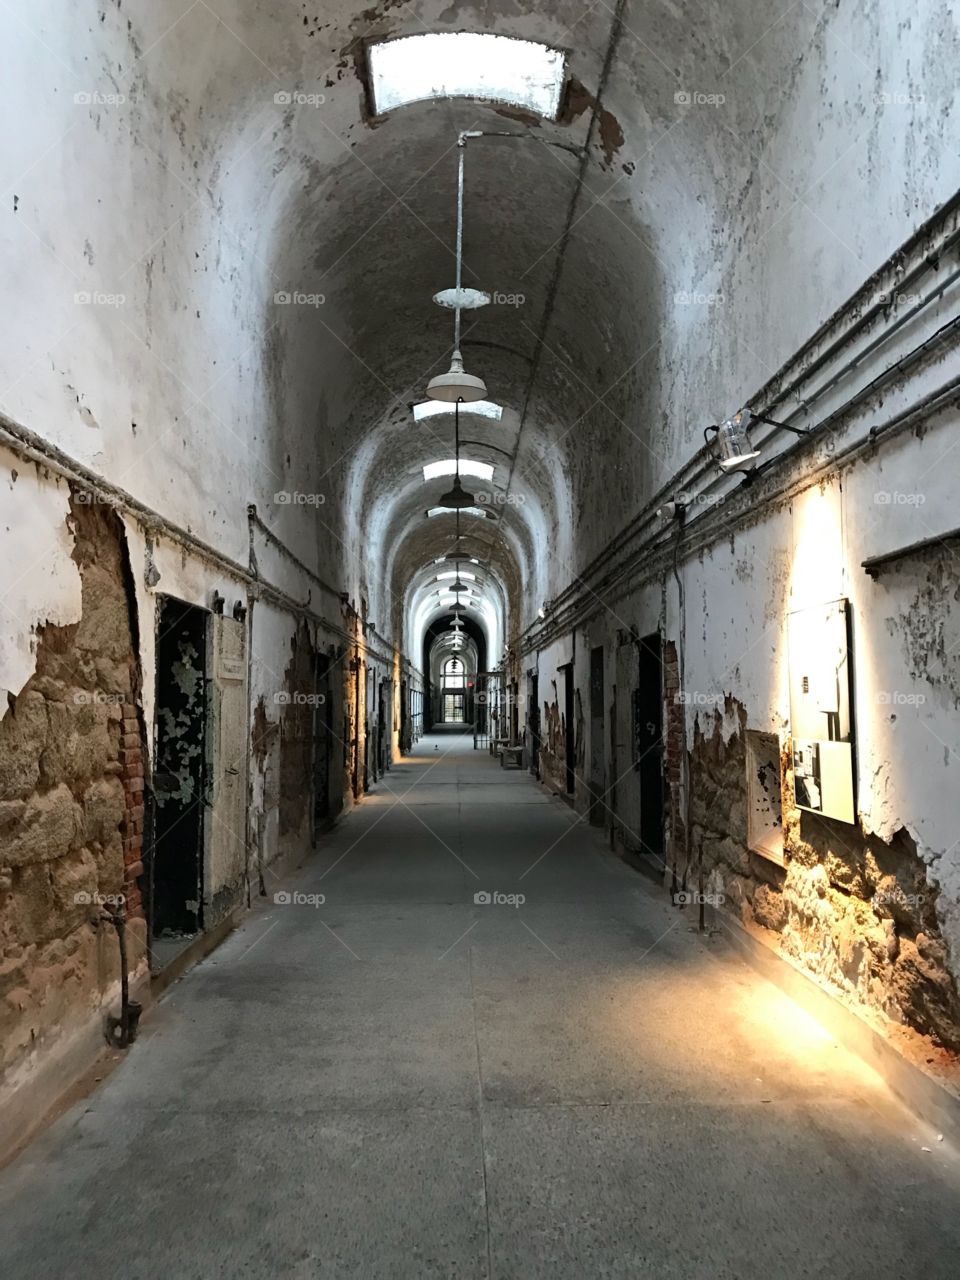 Hallway at Easter State Penitentiary 